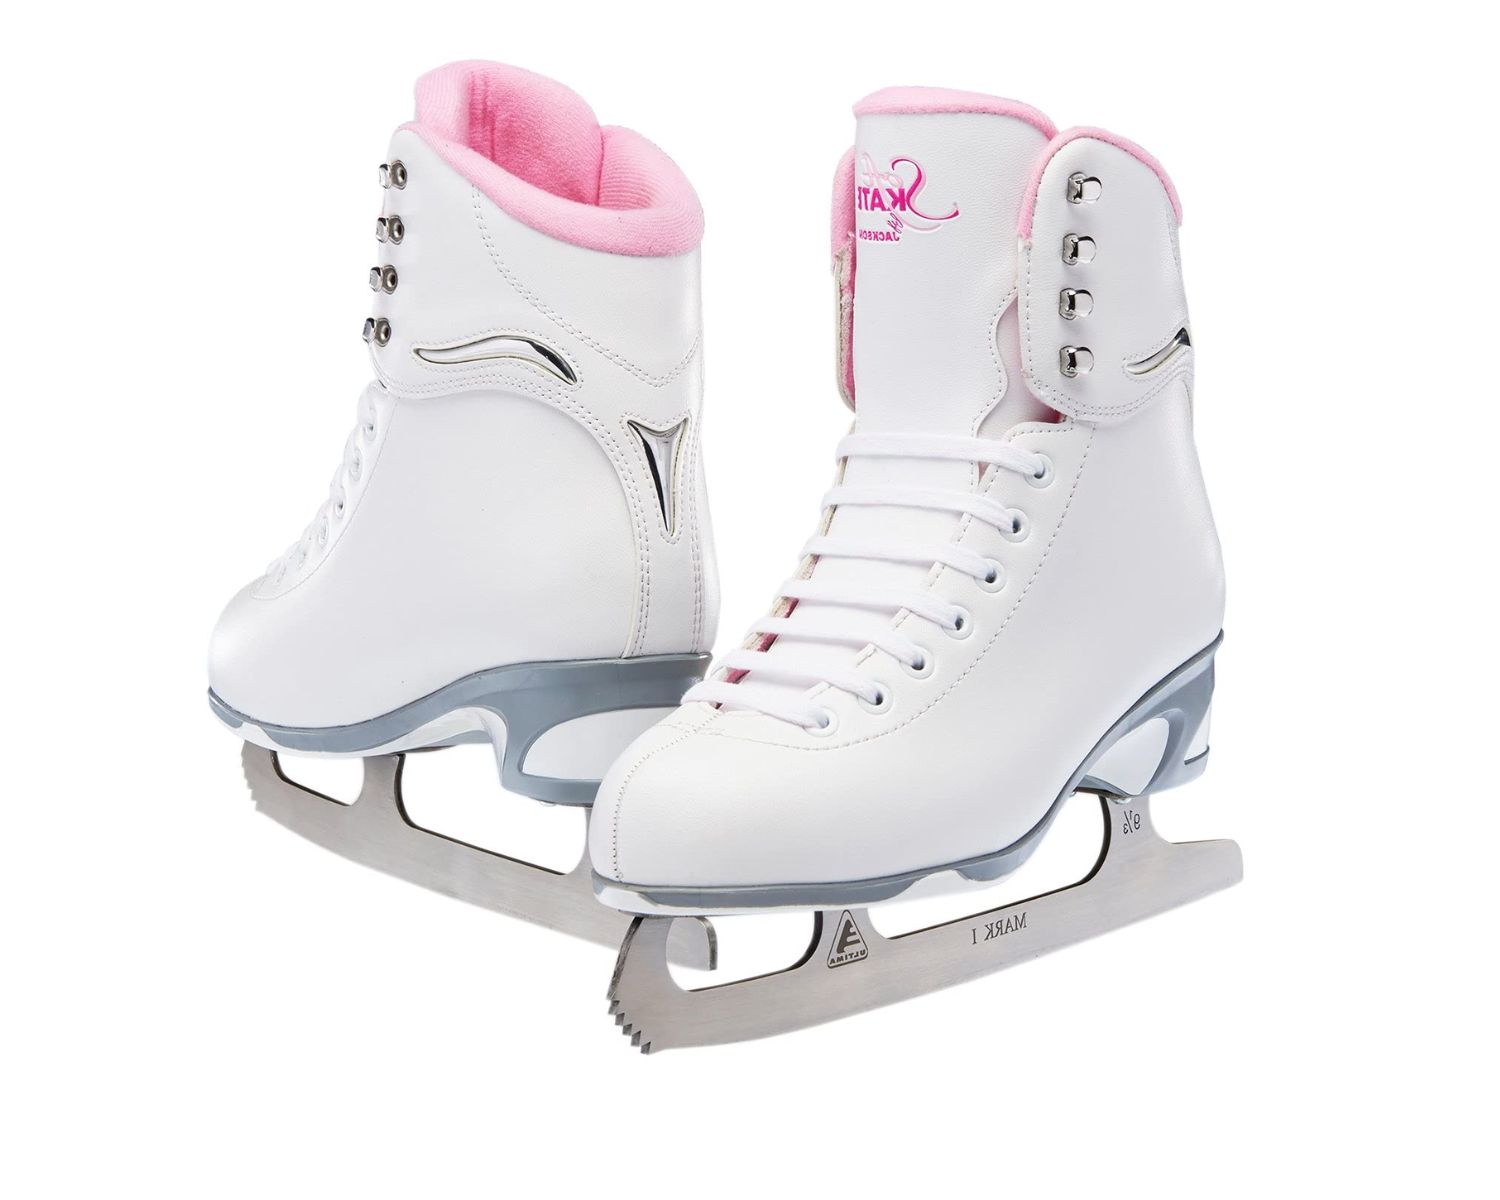 Top Ice Skates Review: Find the Perfect Pair for Your Skating Adventures